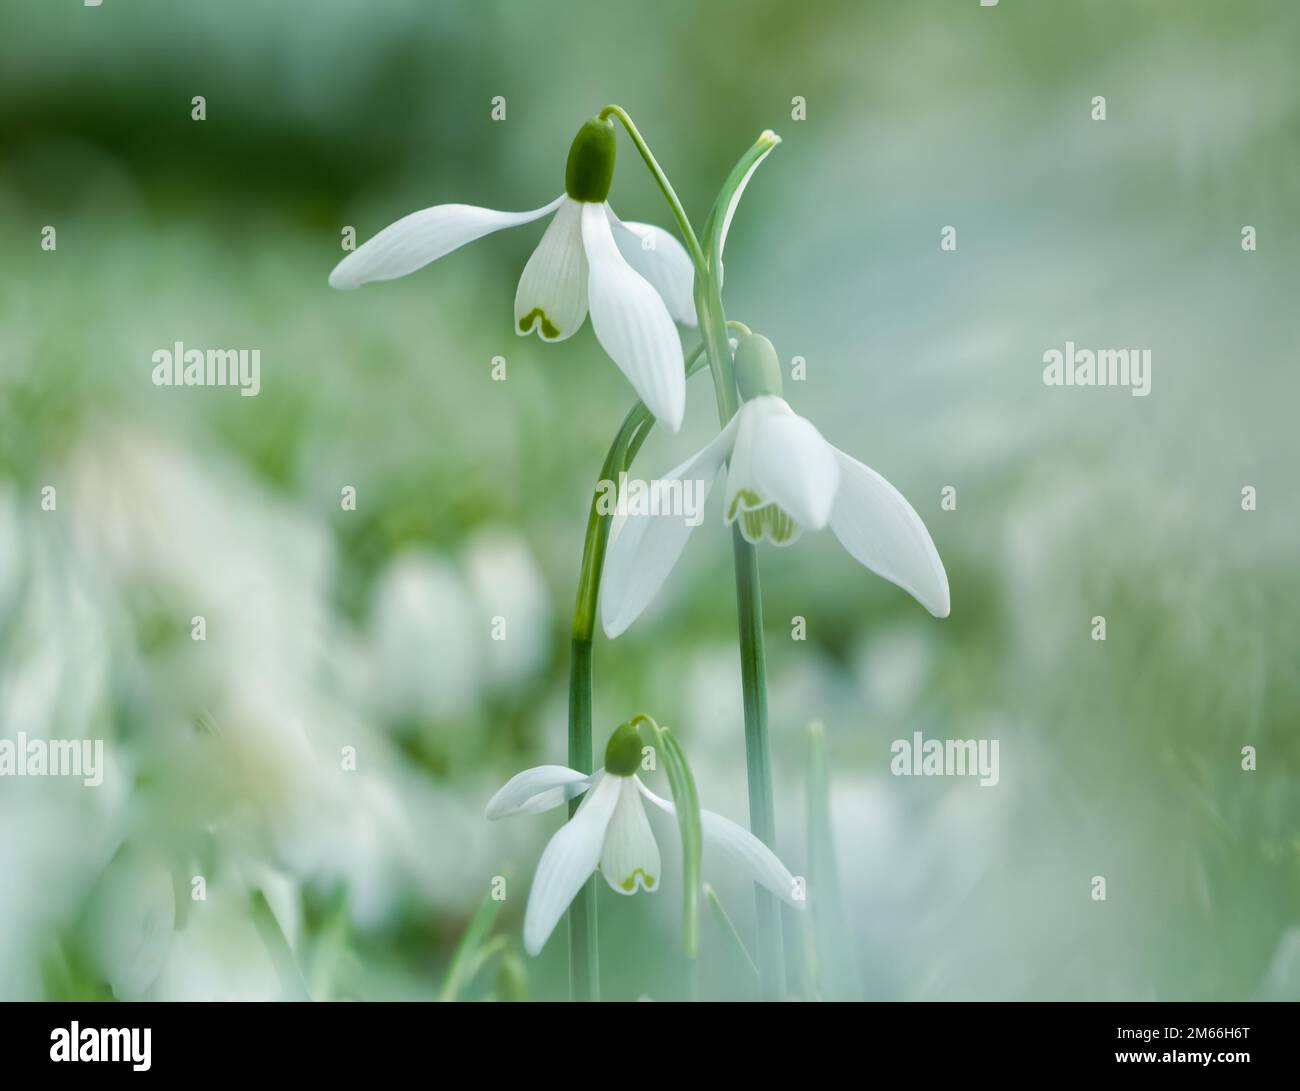 Snowdop flowers, Close up, low angle views of Isolated Snowdrop flowers Stock Photo